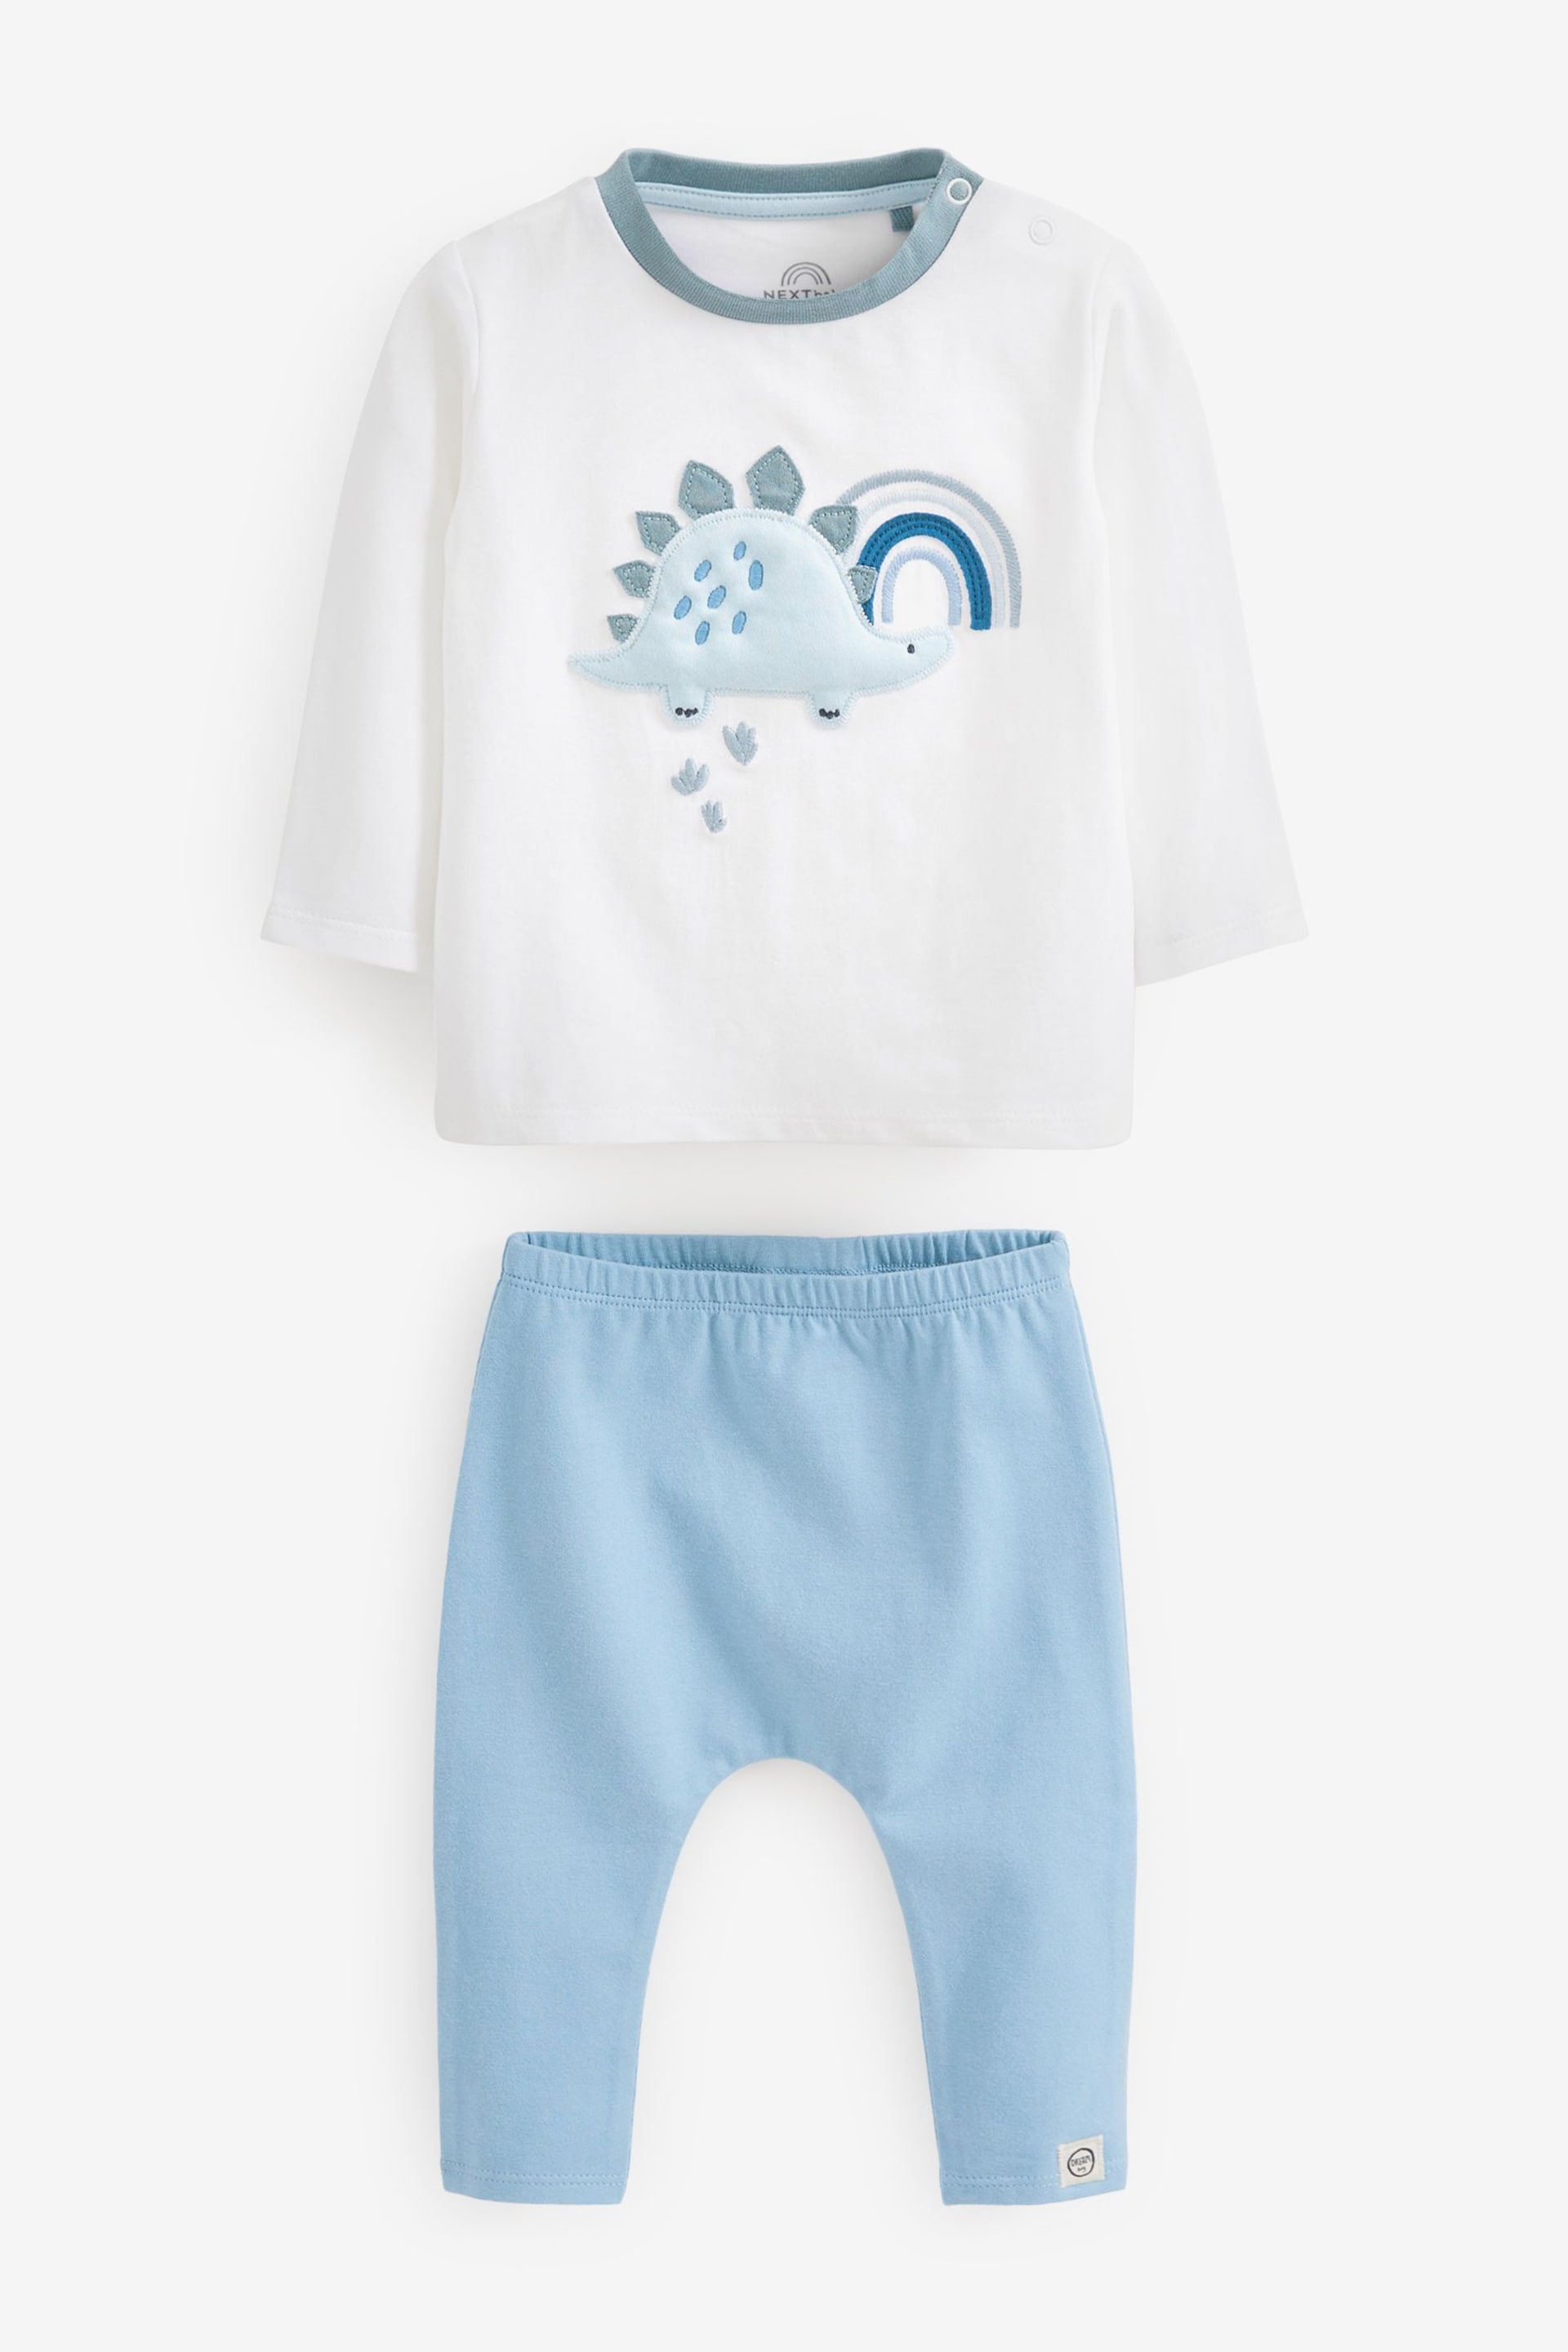 Blue dinosaur Baby T-Shirts And Leggings Set 6 Pack - Image 5 of 5